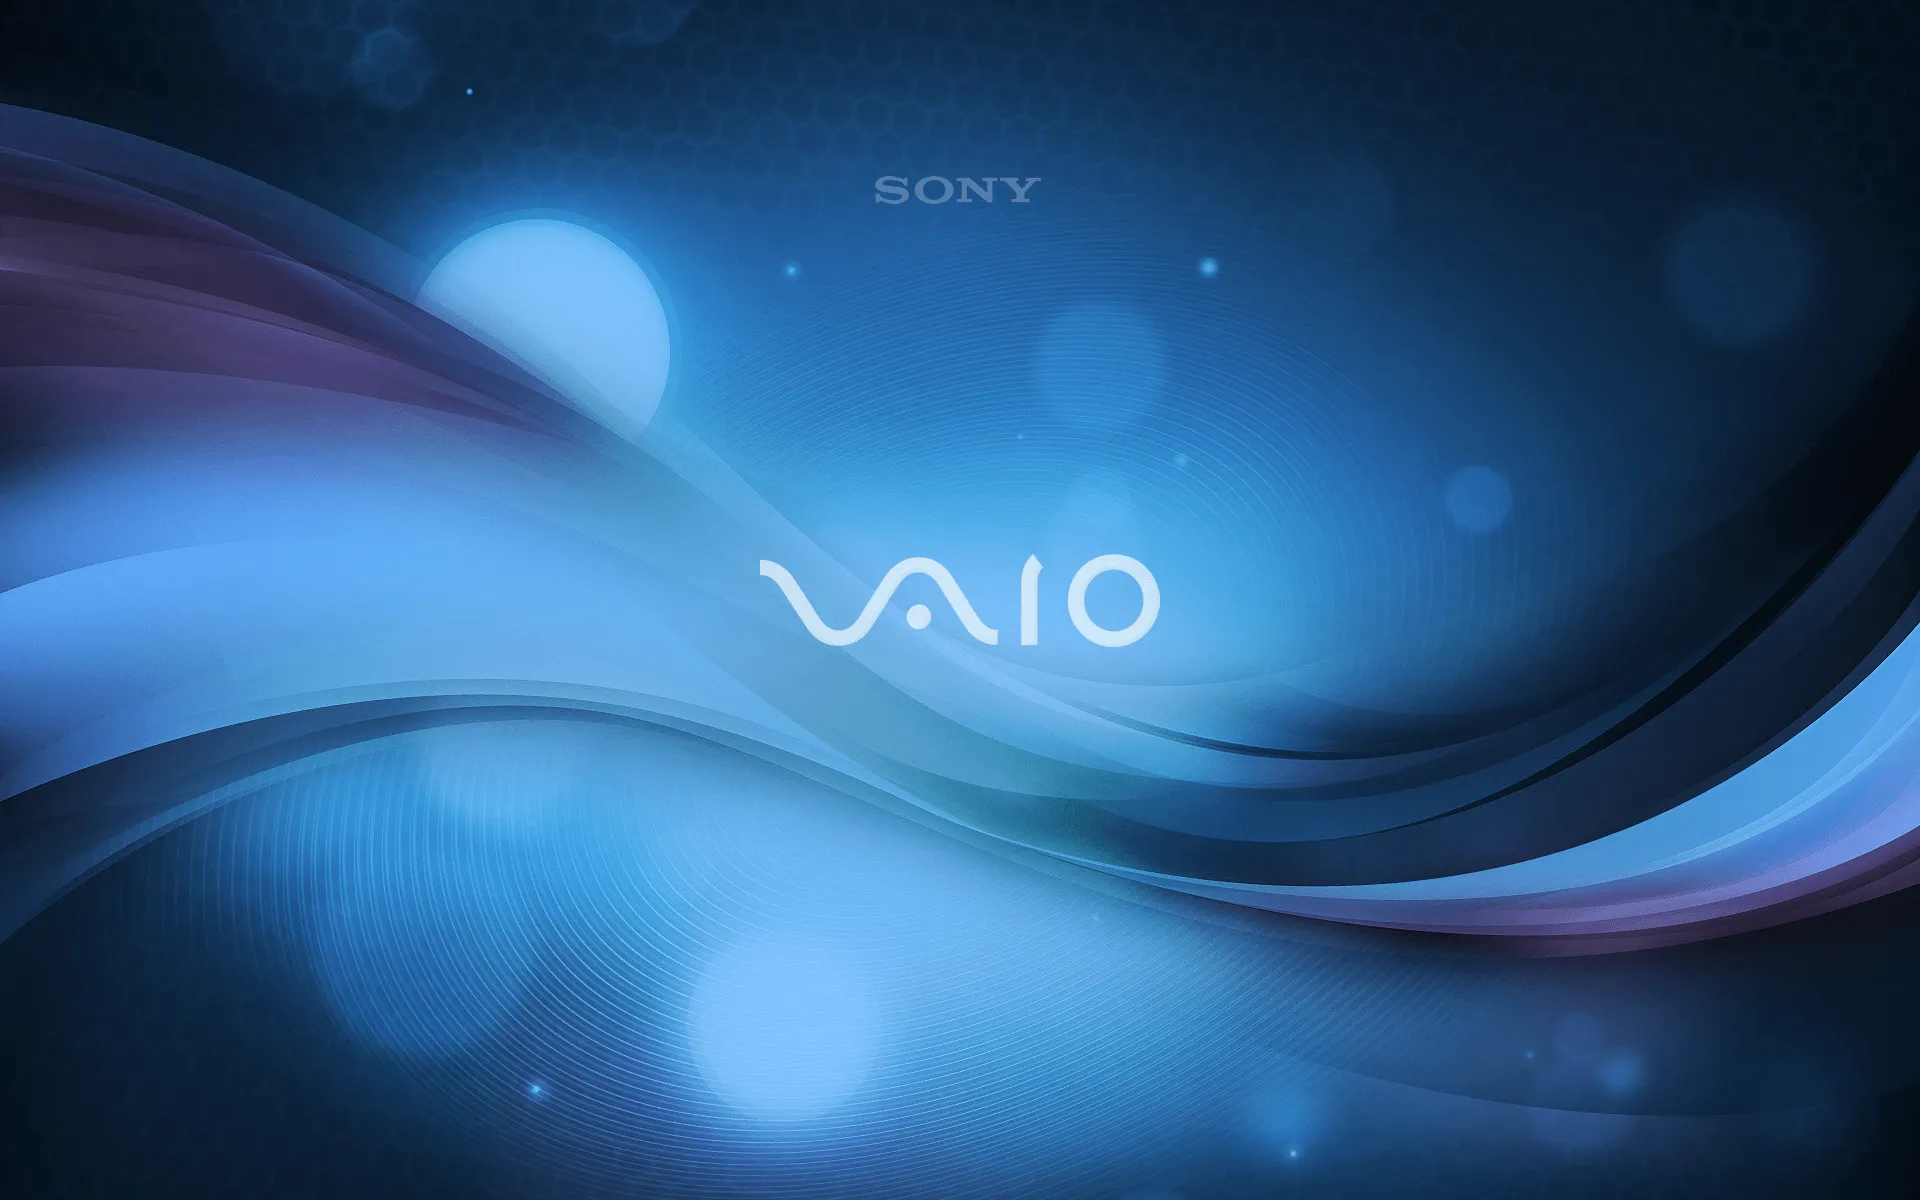 Sony Vaio Logo Images & Pictures - Becuo